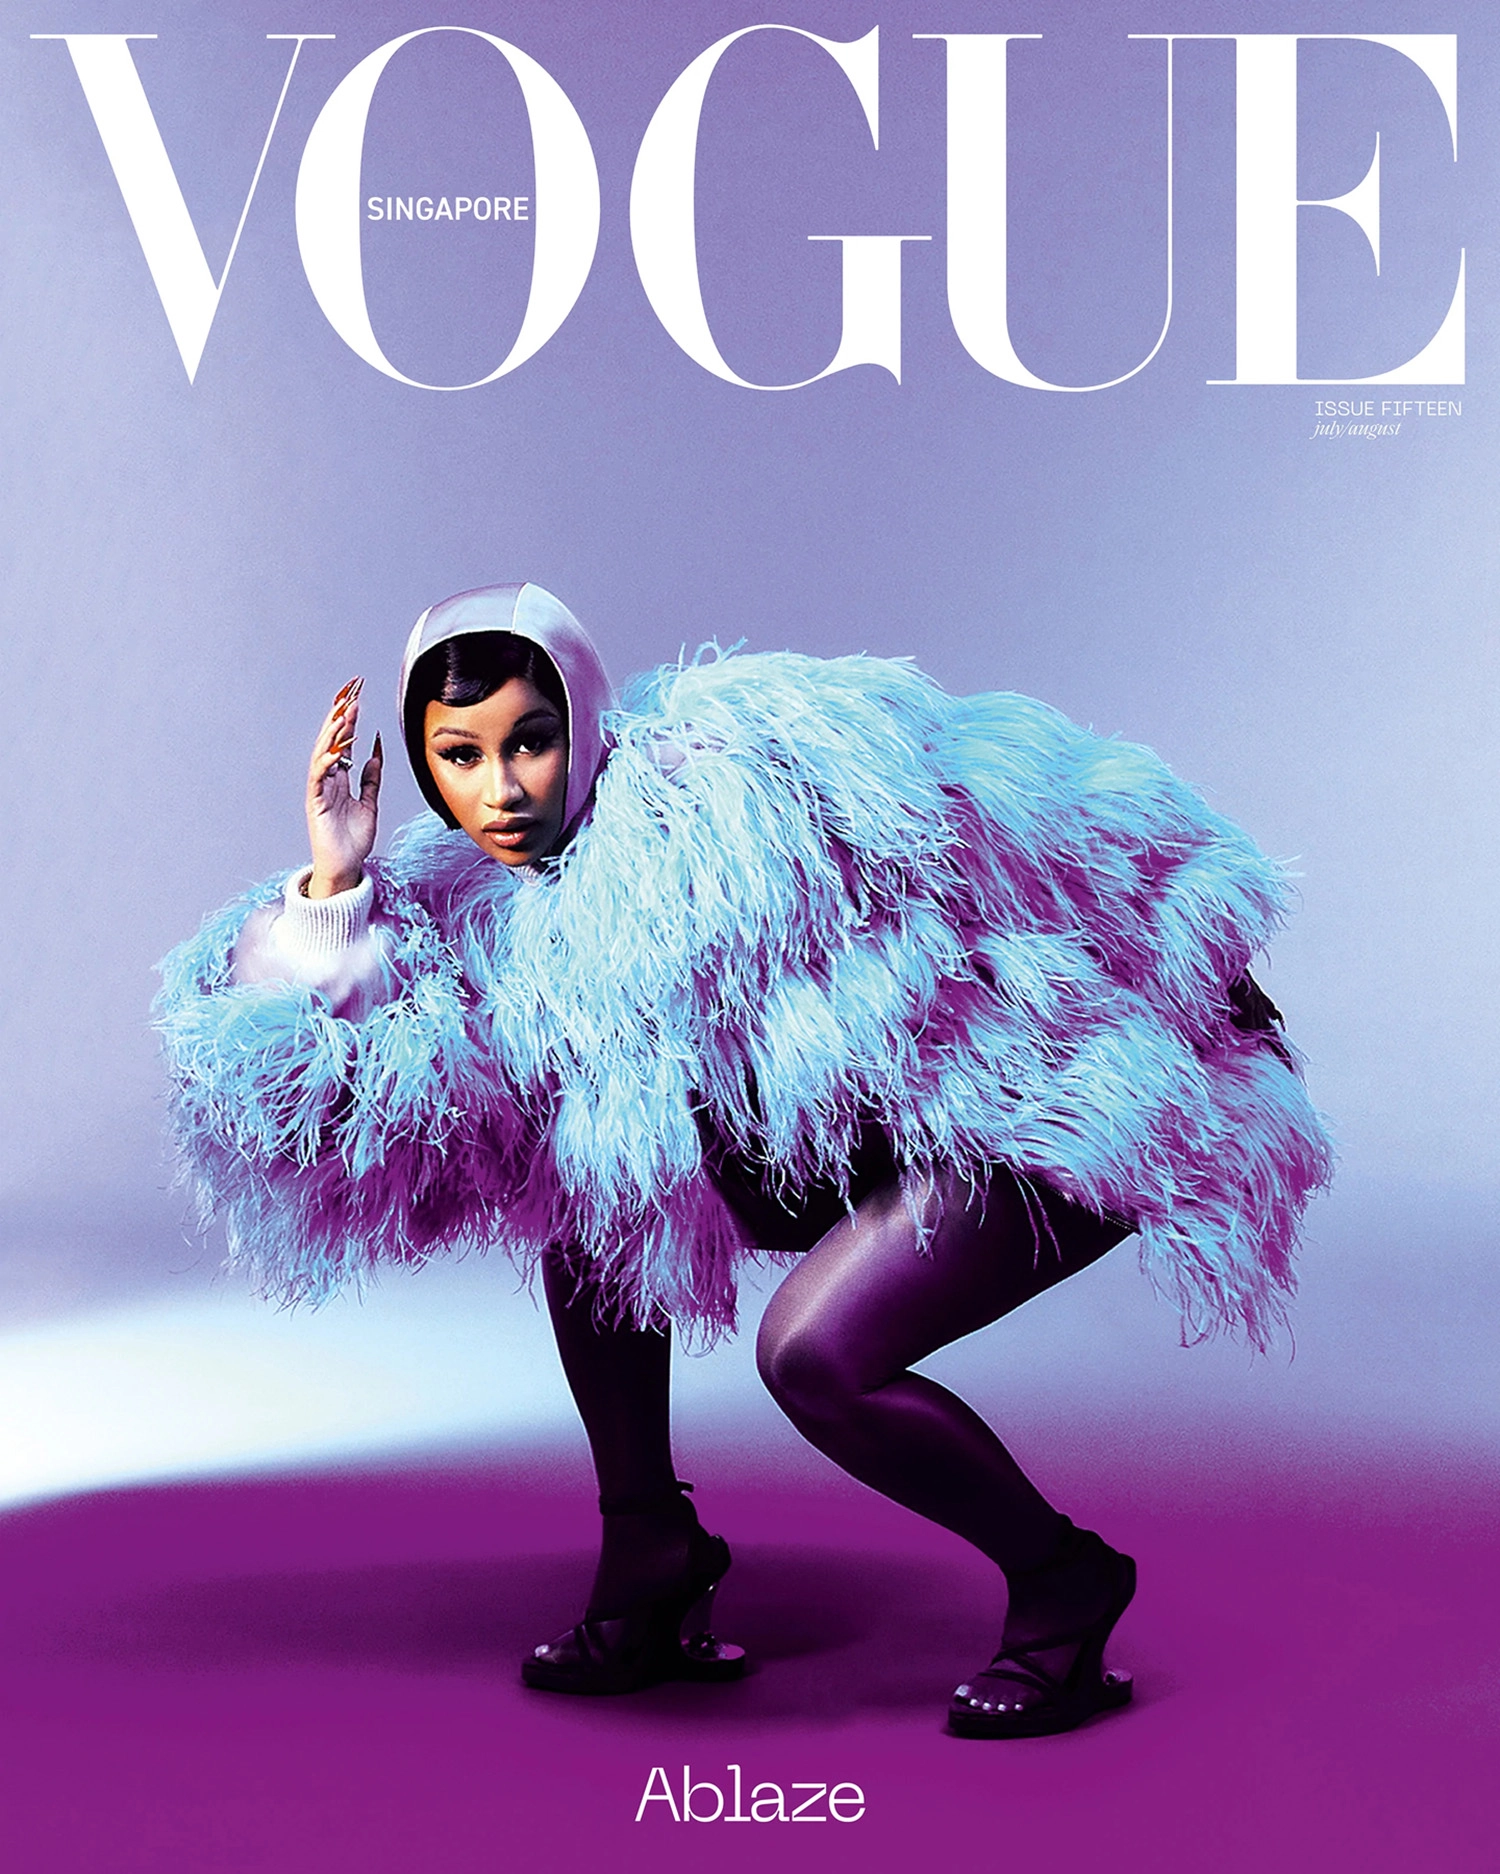 Cardi B covers Vogue Singapore July August 2022 by Lea Colombo